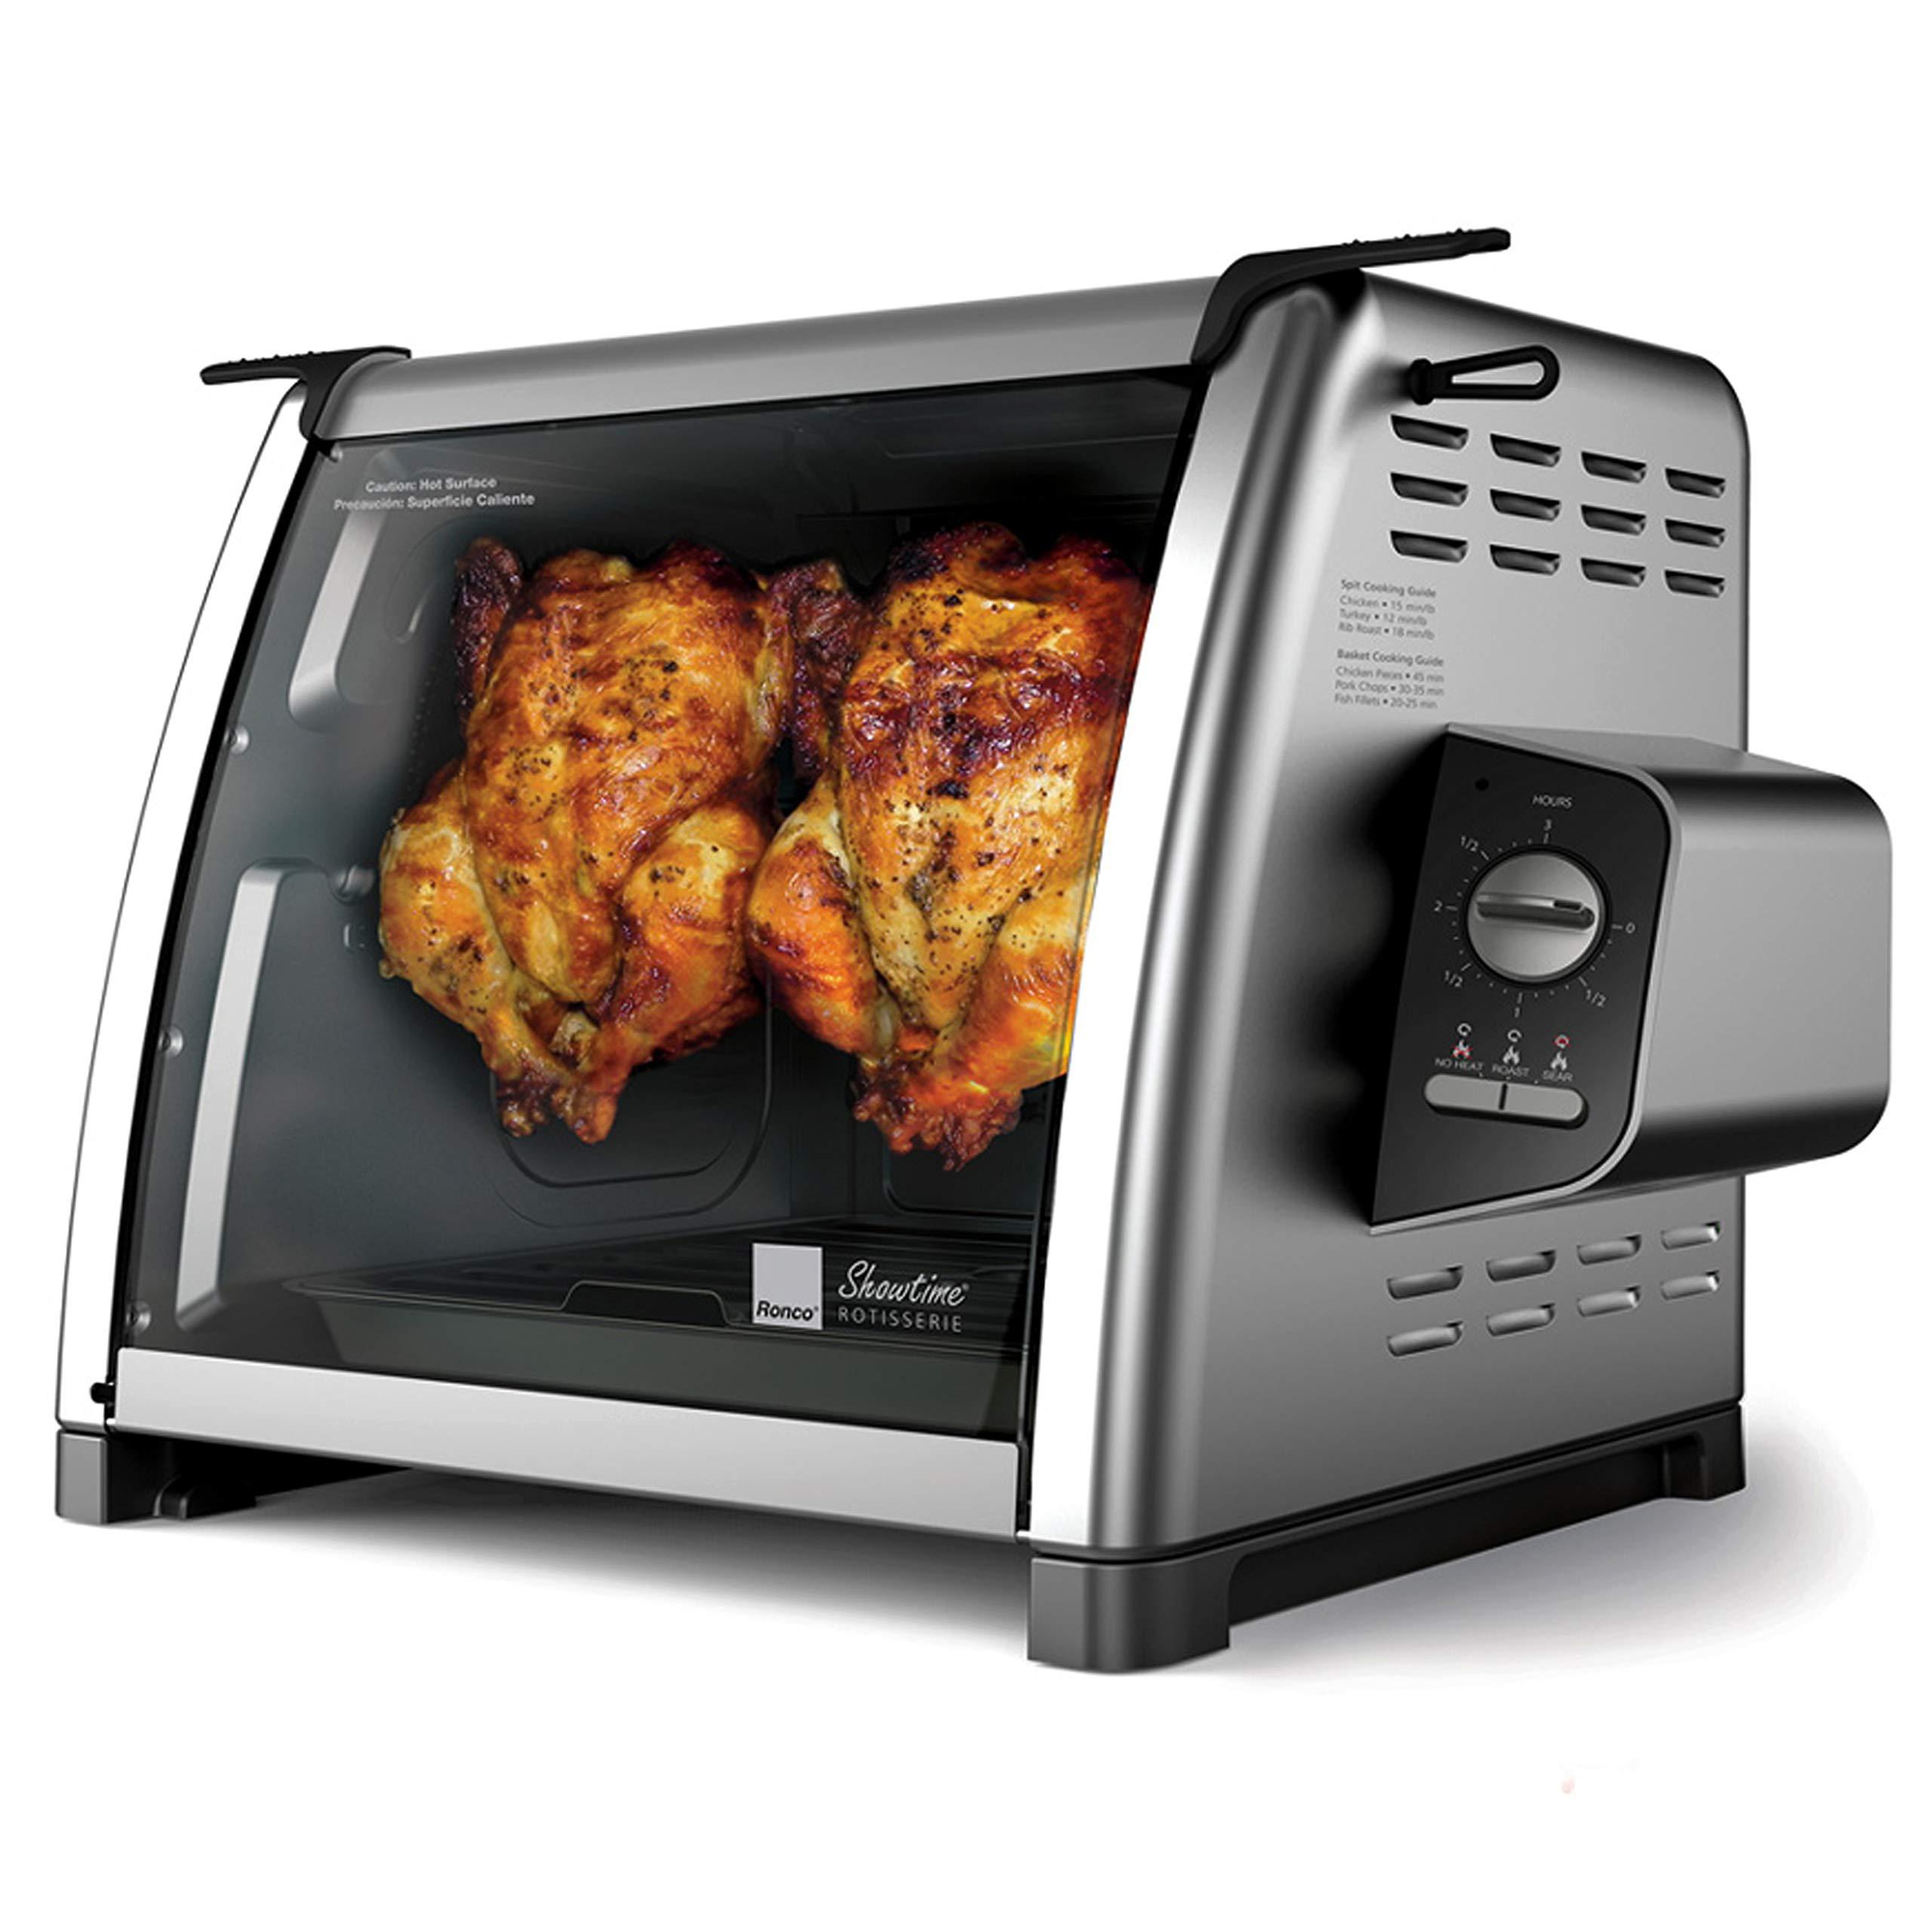 ronco 5500 series rotisserie oven, stainless steel countertop rotisserie oven, 3 cooking functions: rotisserie, sear and no h